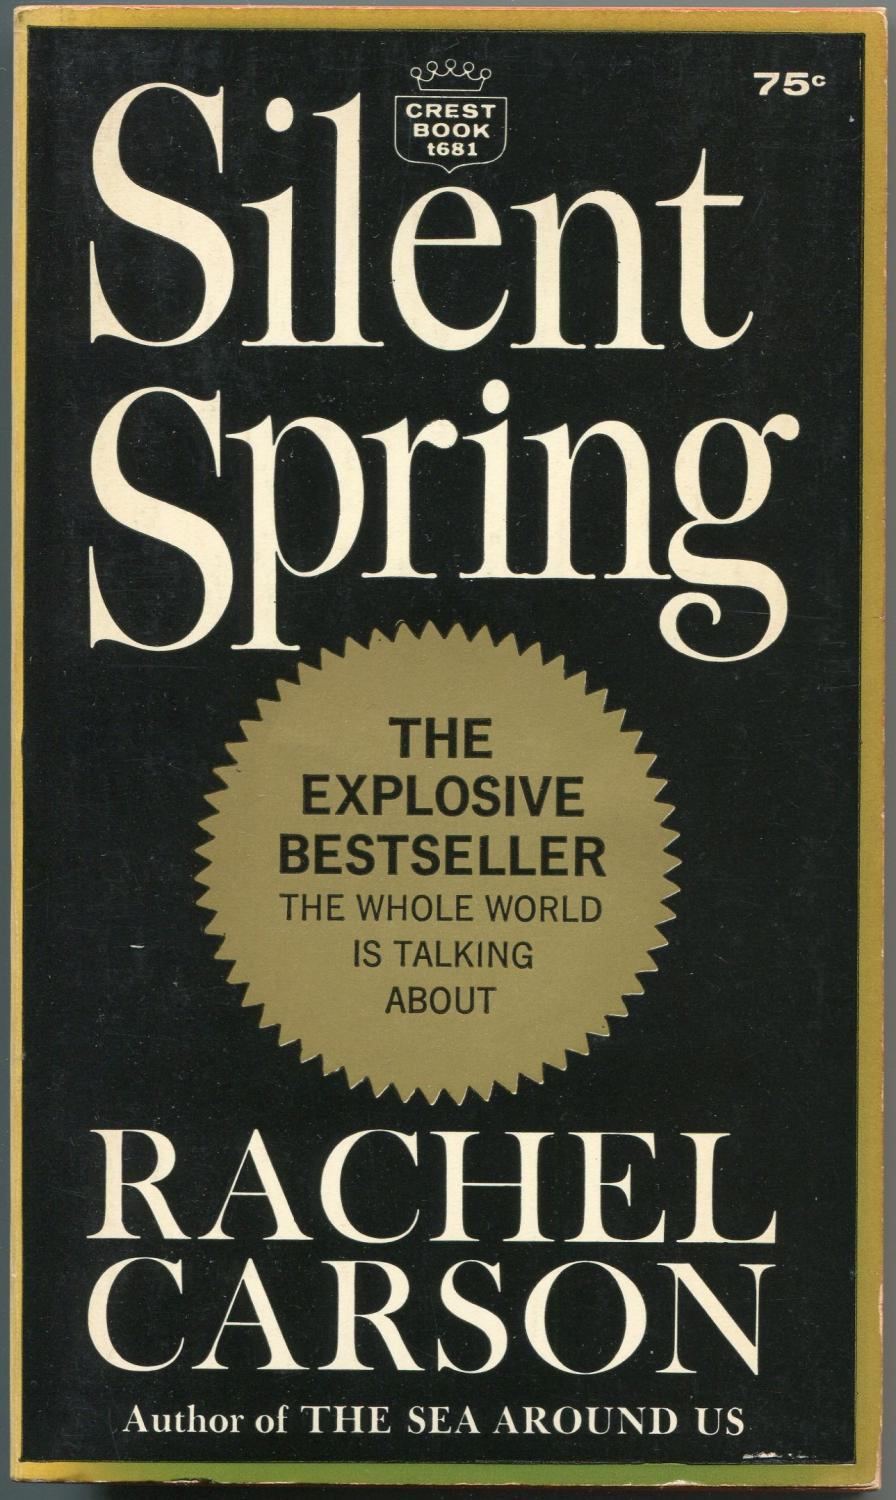 The Importance of Rachel Carson’s Silent Spring